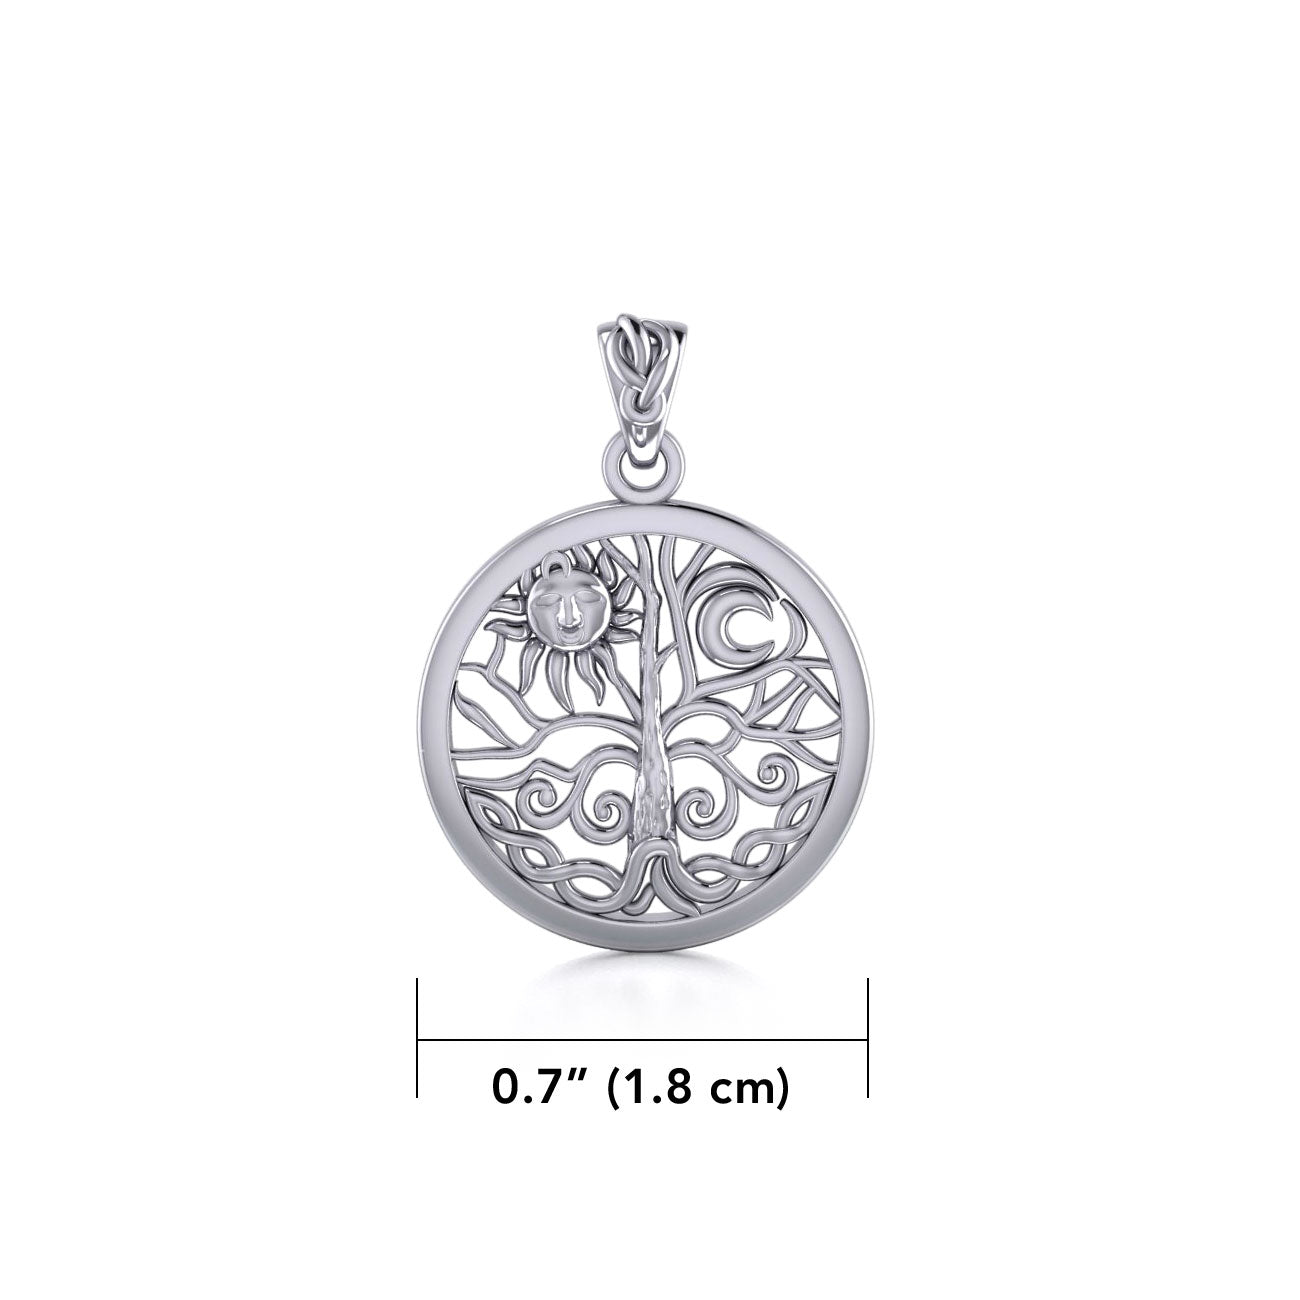 Sun & Moon Tree of Life ~ Sterling Silver Jewelry Pendant TP3109